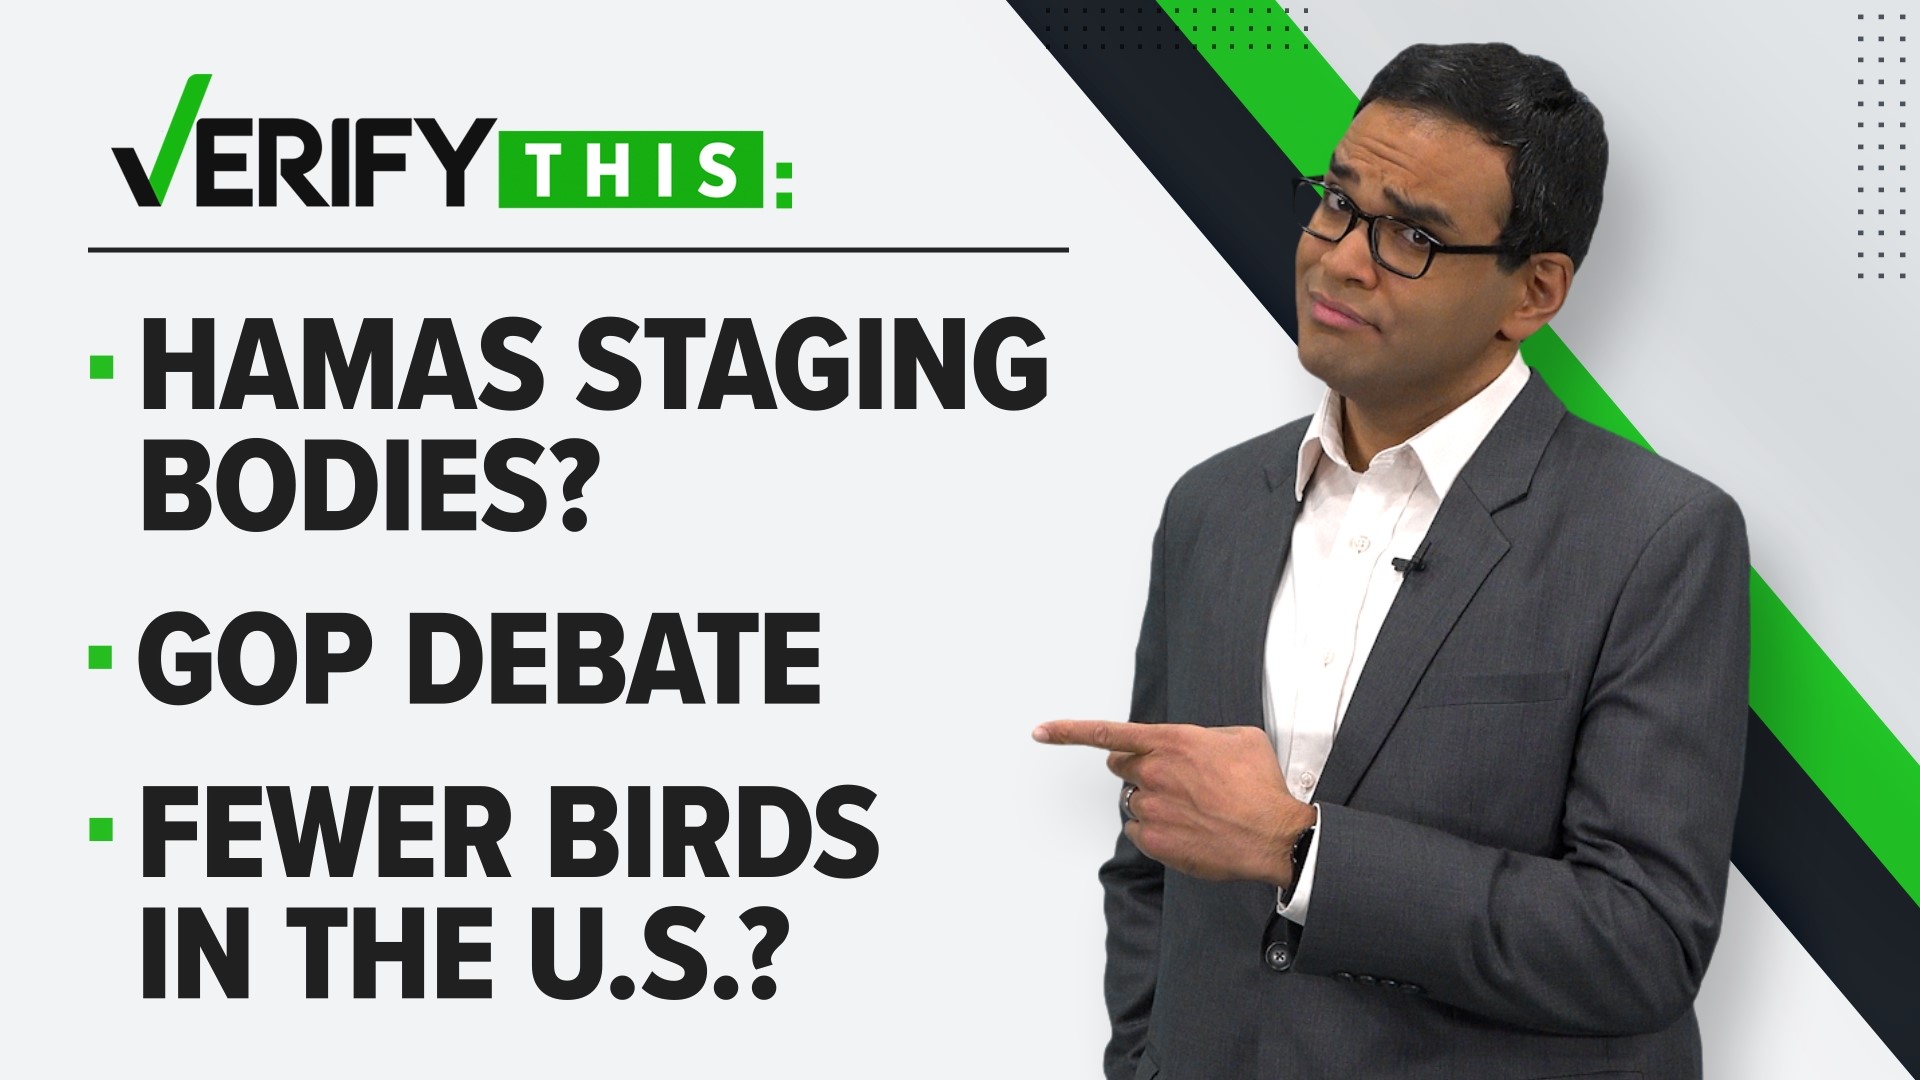 In this week's episode, we verify whether a viral post shows Hamas staging bodies, we review the third GOP debate and look into the declining U.S. bird population.